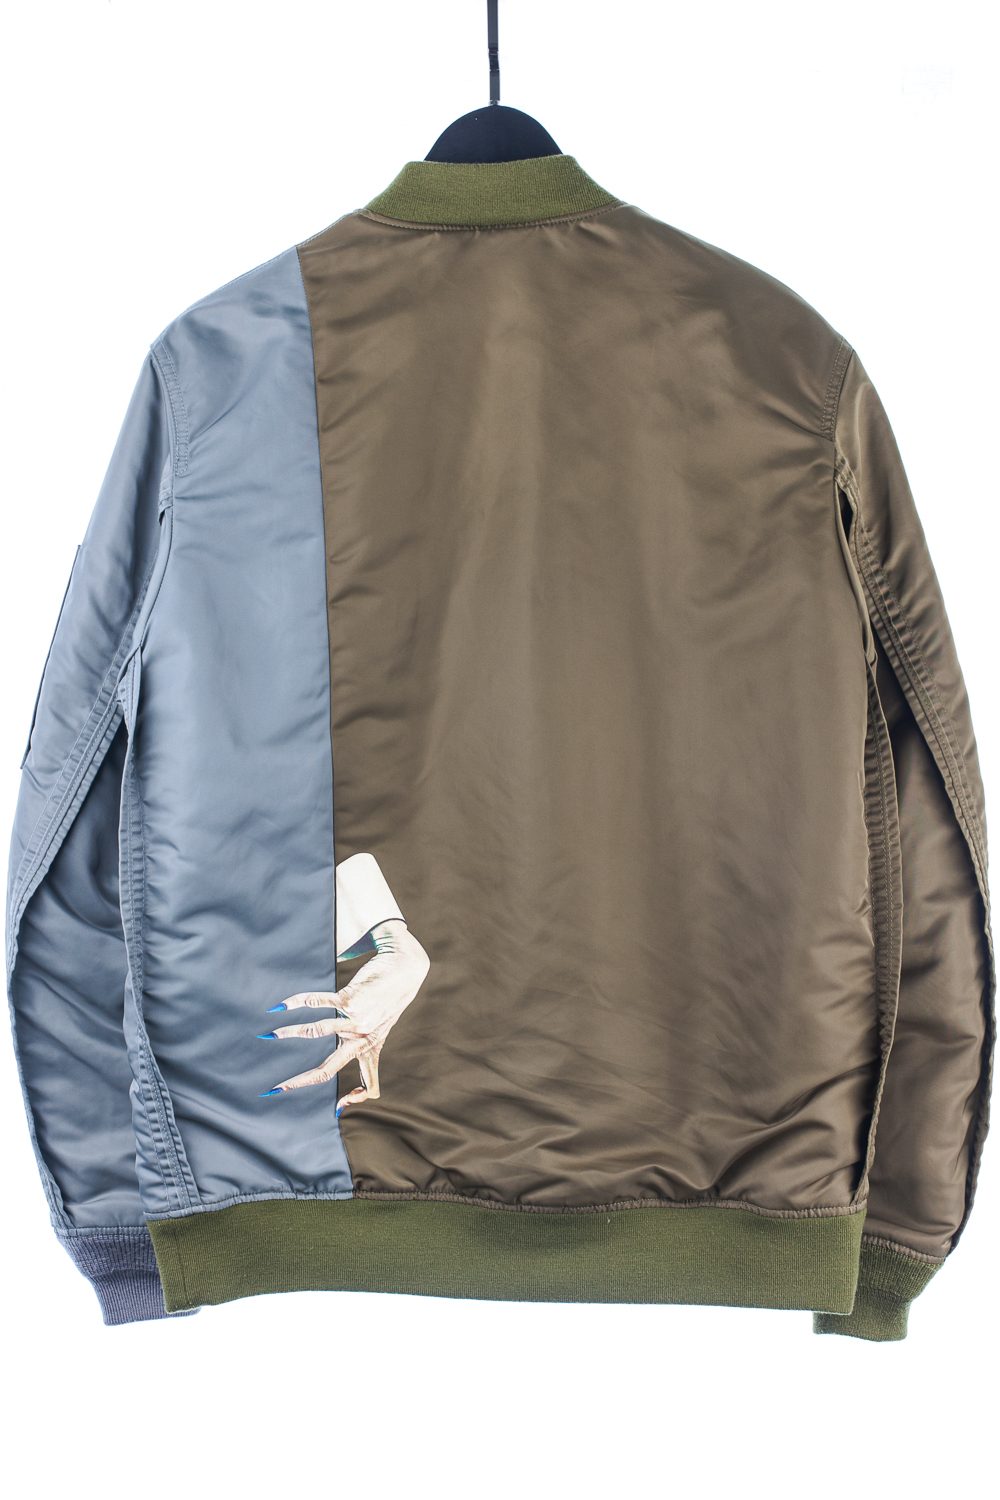 FW15 “No (B)orders” D-Hand Ma-1 Bomber